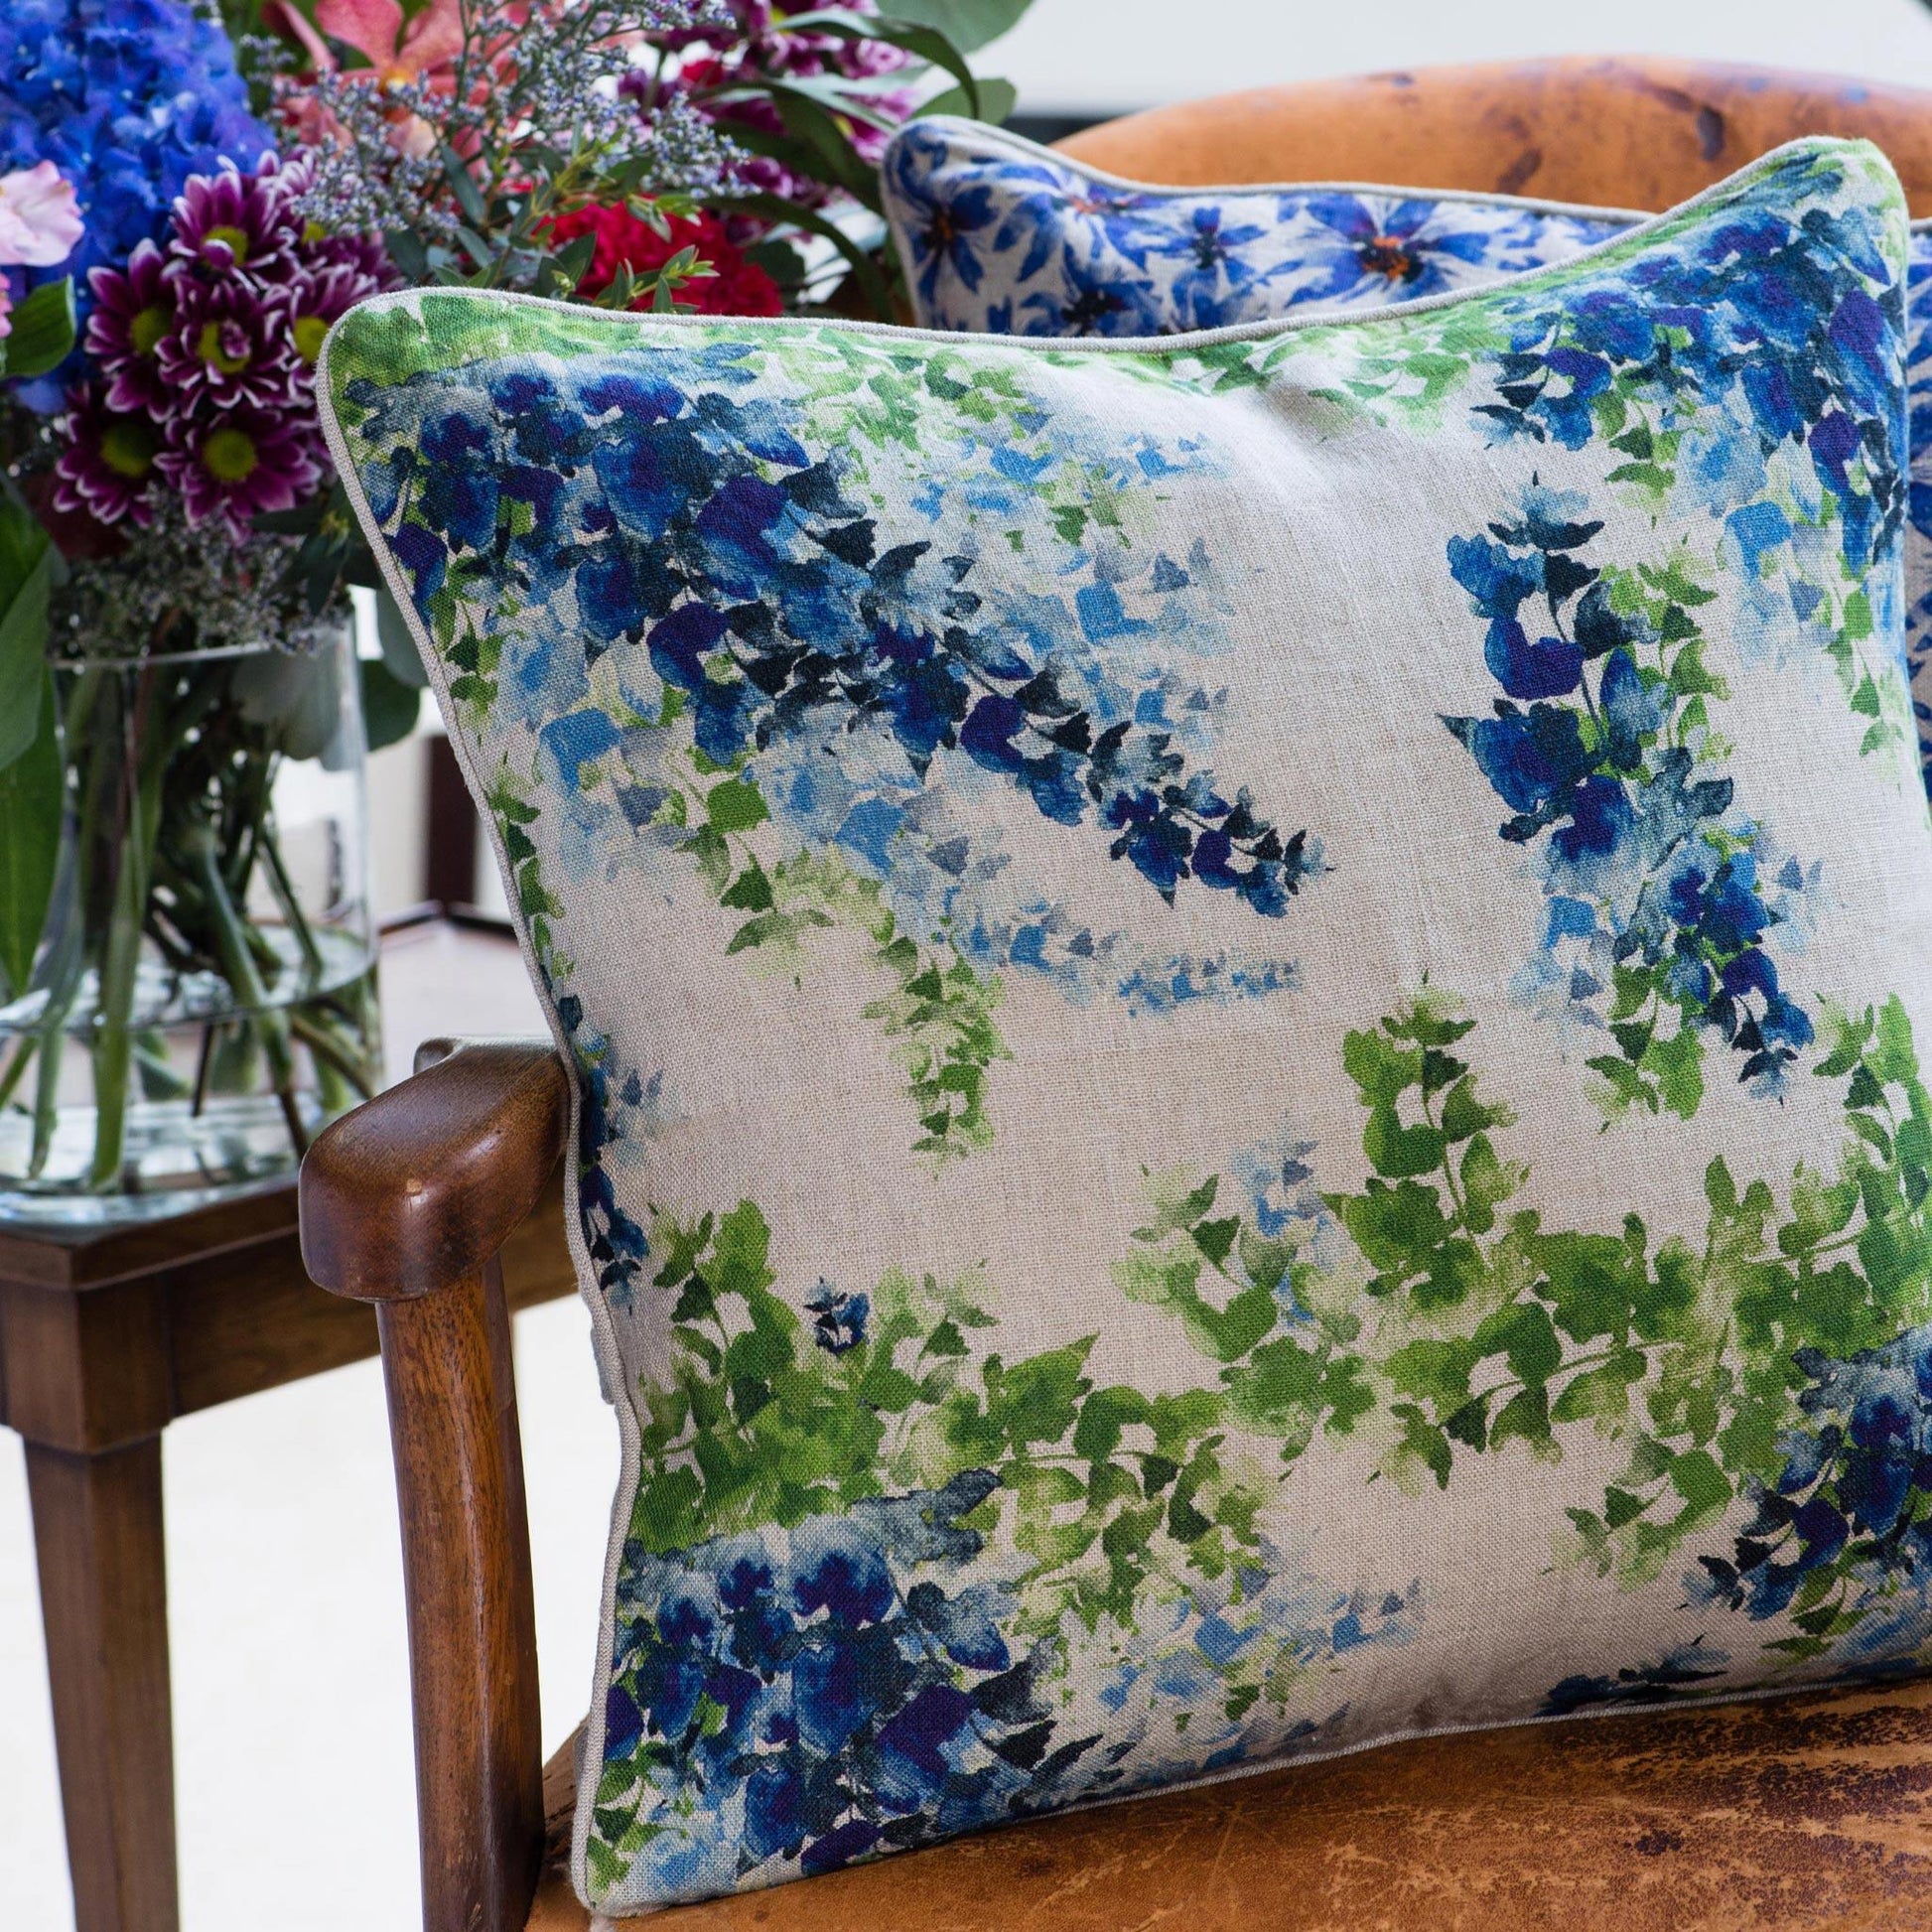 Blue and green floral print organic linen pillow cover on leather chair with flowers in background.